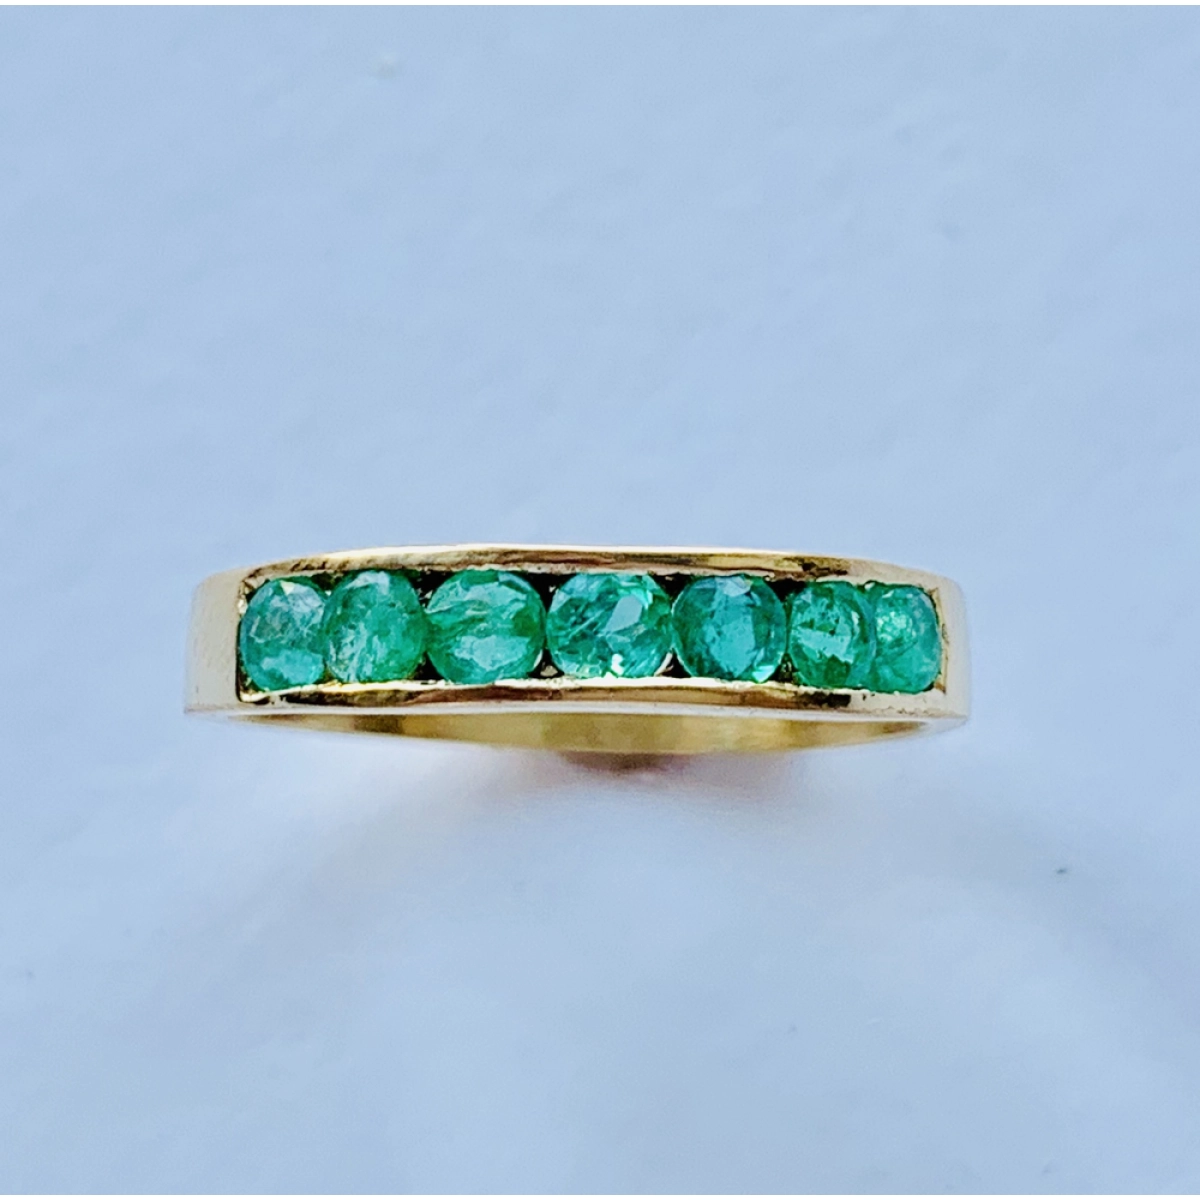 RING OF EMERALDS IN 18K GOLD